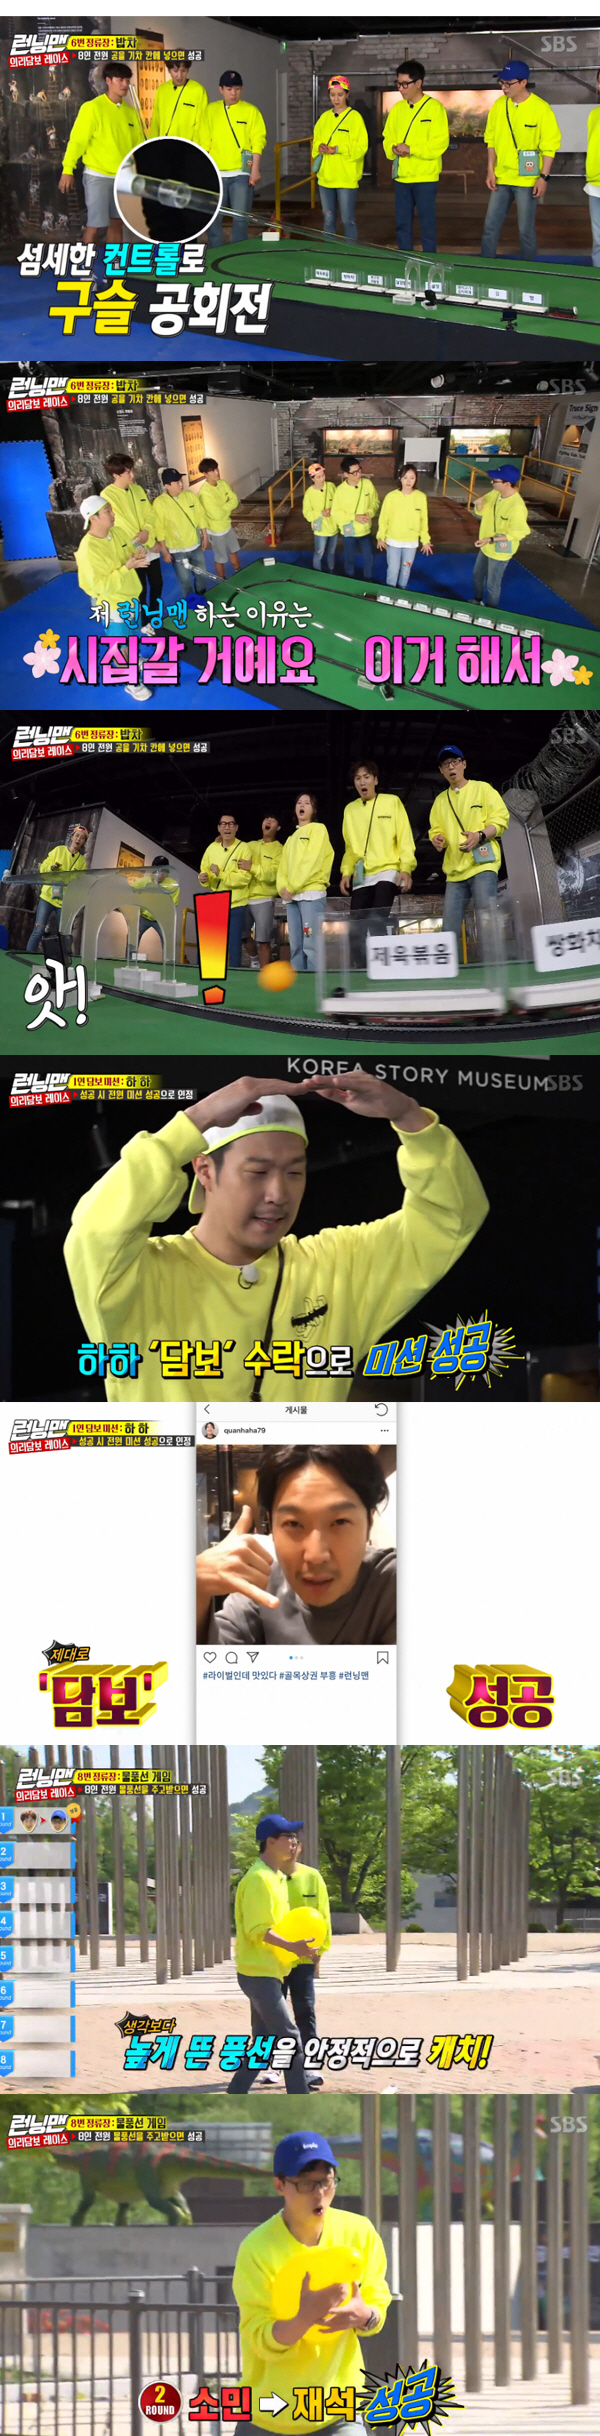 <p>19 broadcast of SBS Running Manmembers 9 anniversary of the domestic fans for Running Man Love Without Love (Live at Summer Vacation/08 - running research projectStone.</p><p>9 years after the first domestic fan meeting held to members is Love Without Love (Live at Summer Vacation/08 CUE sheet configuration and with a fierce Battle then unfolded.</p><p>The first members of the group dance two and secured the race unfolded. 1 the first stop on The Mission is the focal point, 8 power over and The Mission to progress. But then I not a person fit, my foot fit, the initial fit on the back failed. This in analysis with the collateral as determined. With emergency cash, passbook and password of the use, ever was the biggest lie now wife on the phone to say. But JI-Seok is troubled..... The Mission to give a laugh.</p><p> The water in the balloons to progress the game, 8 power a water balloon and receive if successful. Kim Jong Kook almost brought success as possible in a safe toss for the best among the hole of the support seat with a sheep and more like a thrown water balloon and receive data was successful.</p><p>This in 3 of The Mission in success for members is Love Without Love (Live at Summer Vacation/08 at their desired cool dance to.</p>